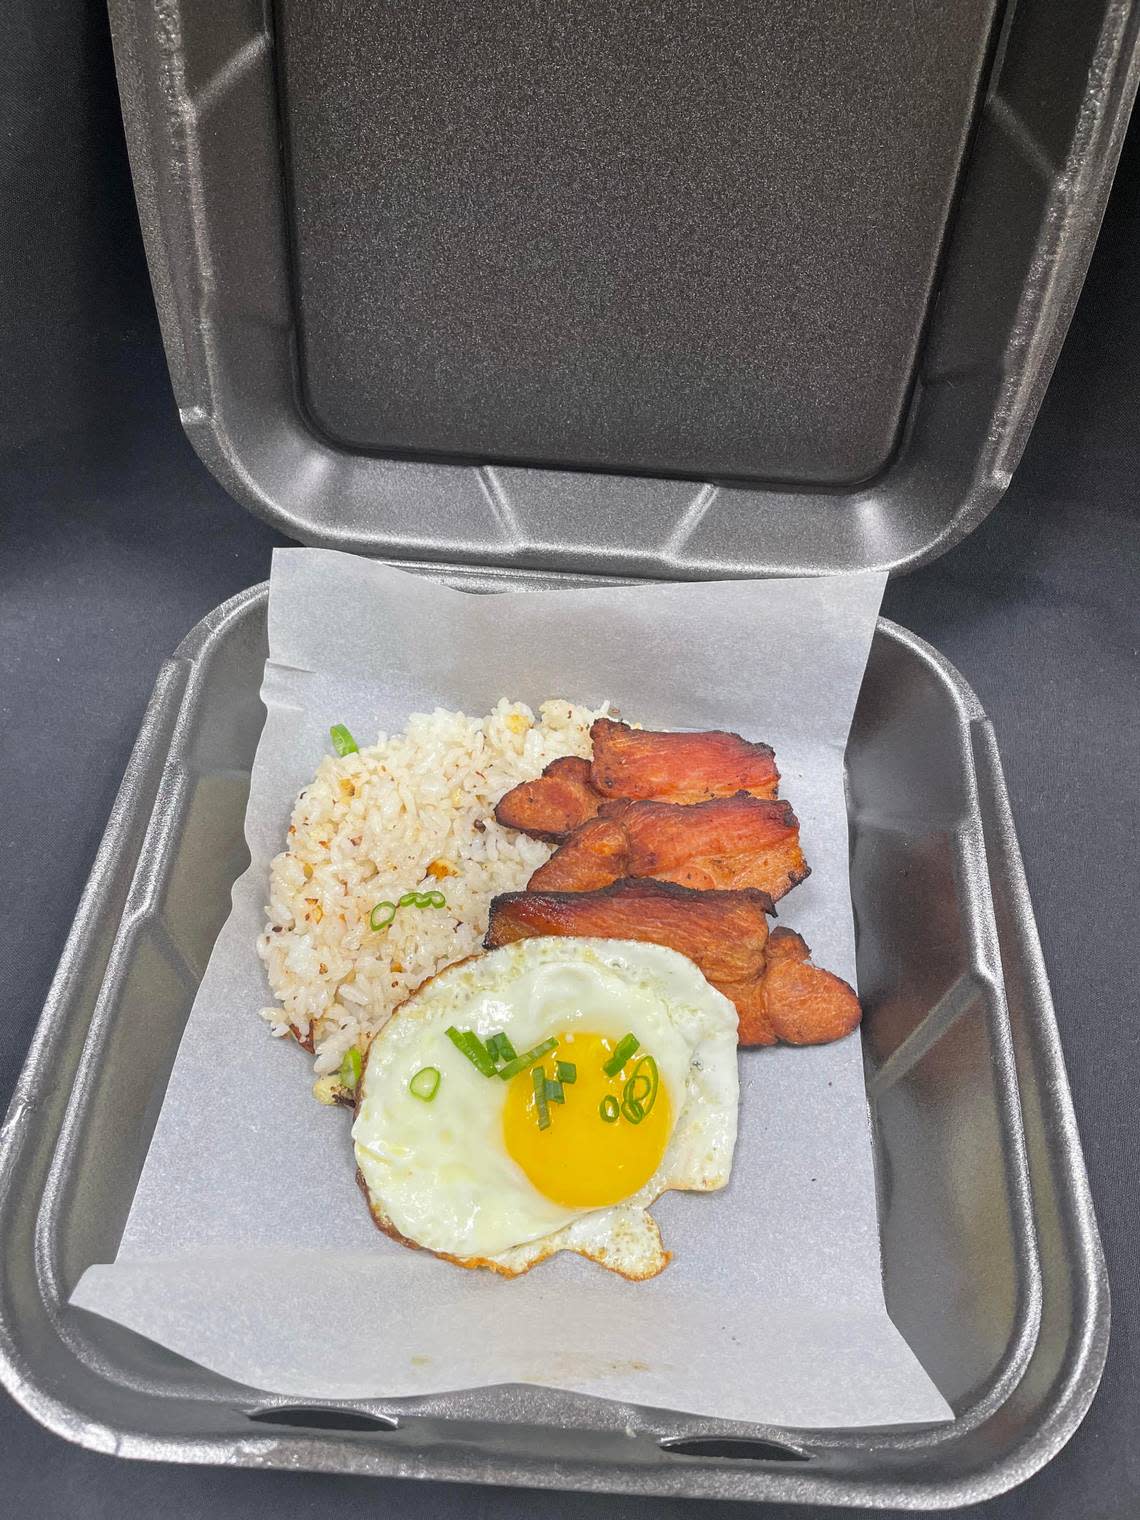 Filipino breakfast bowl with garlic fried rice, pork belly and an egg from the Root 76 Cuisine commissary opening soon in Warner Robins. This option is available with a brisket also.